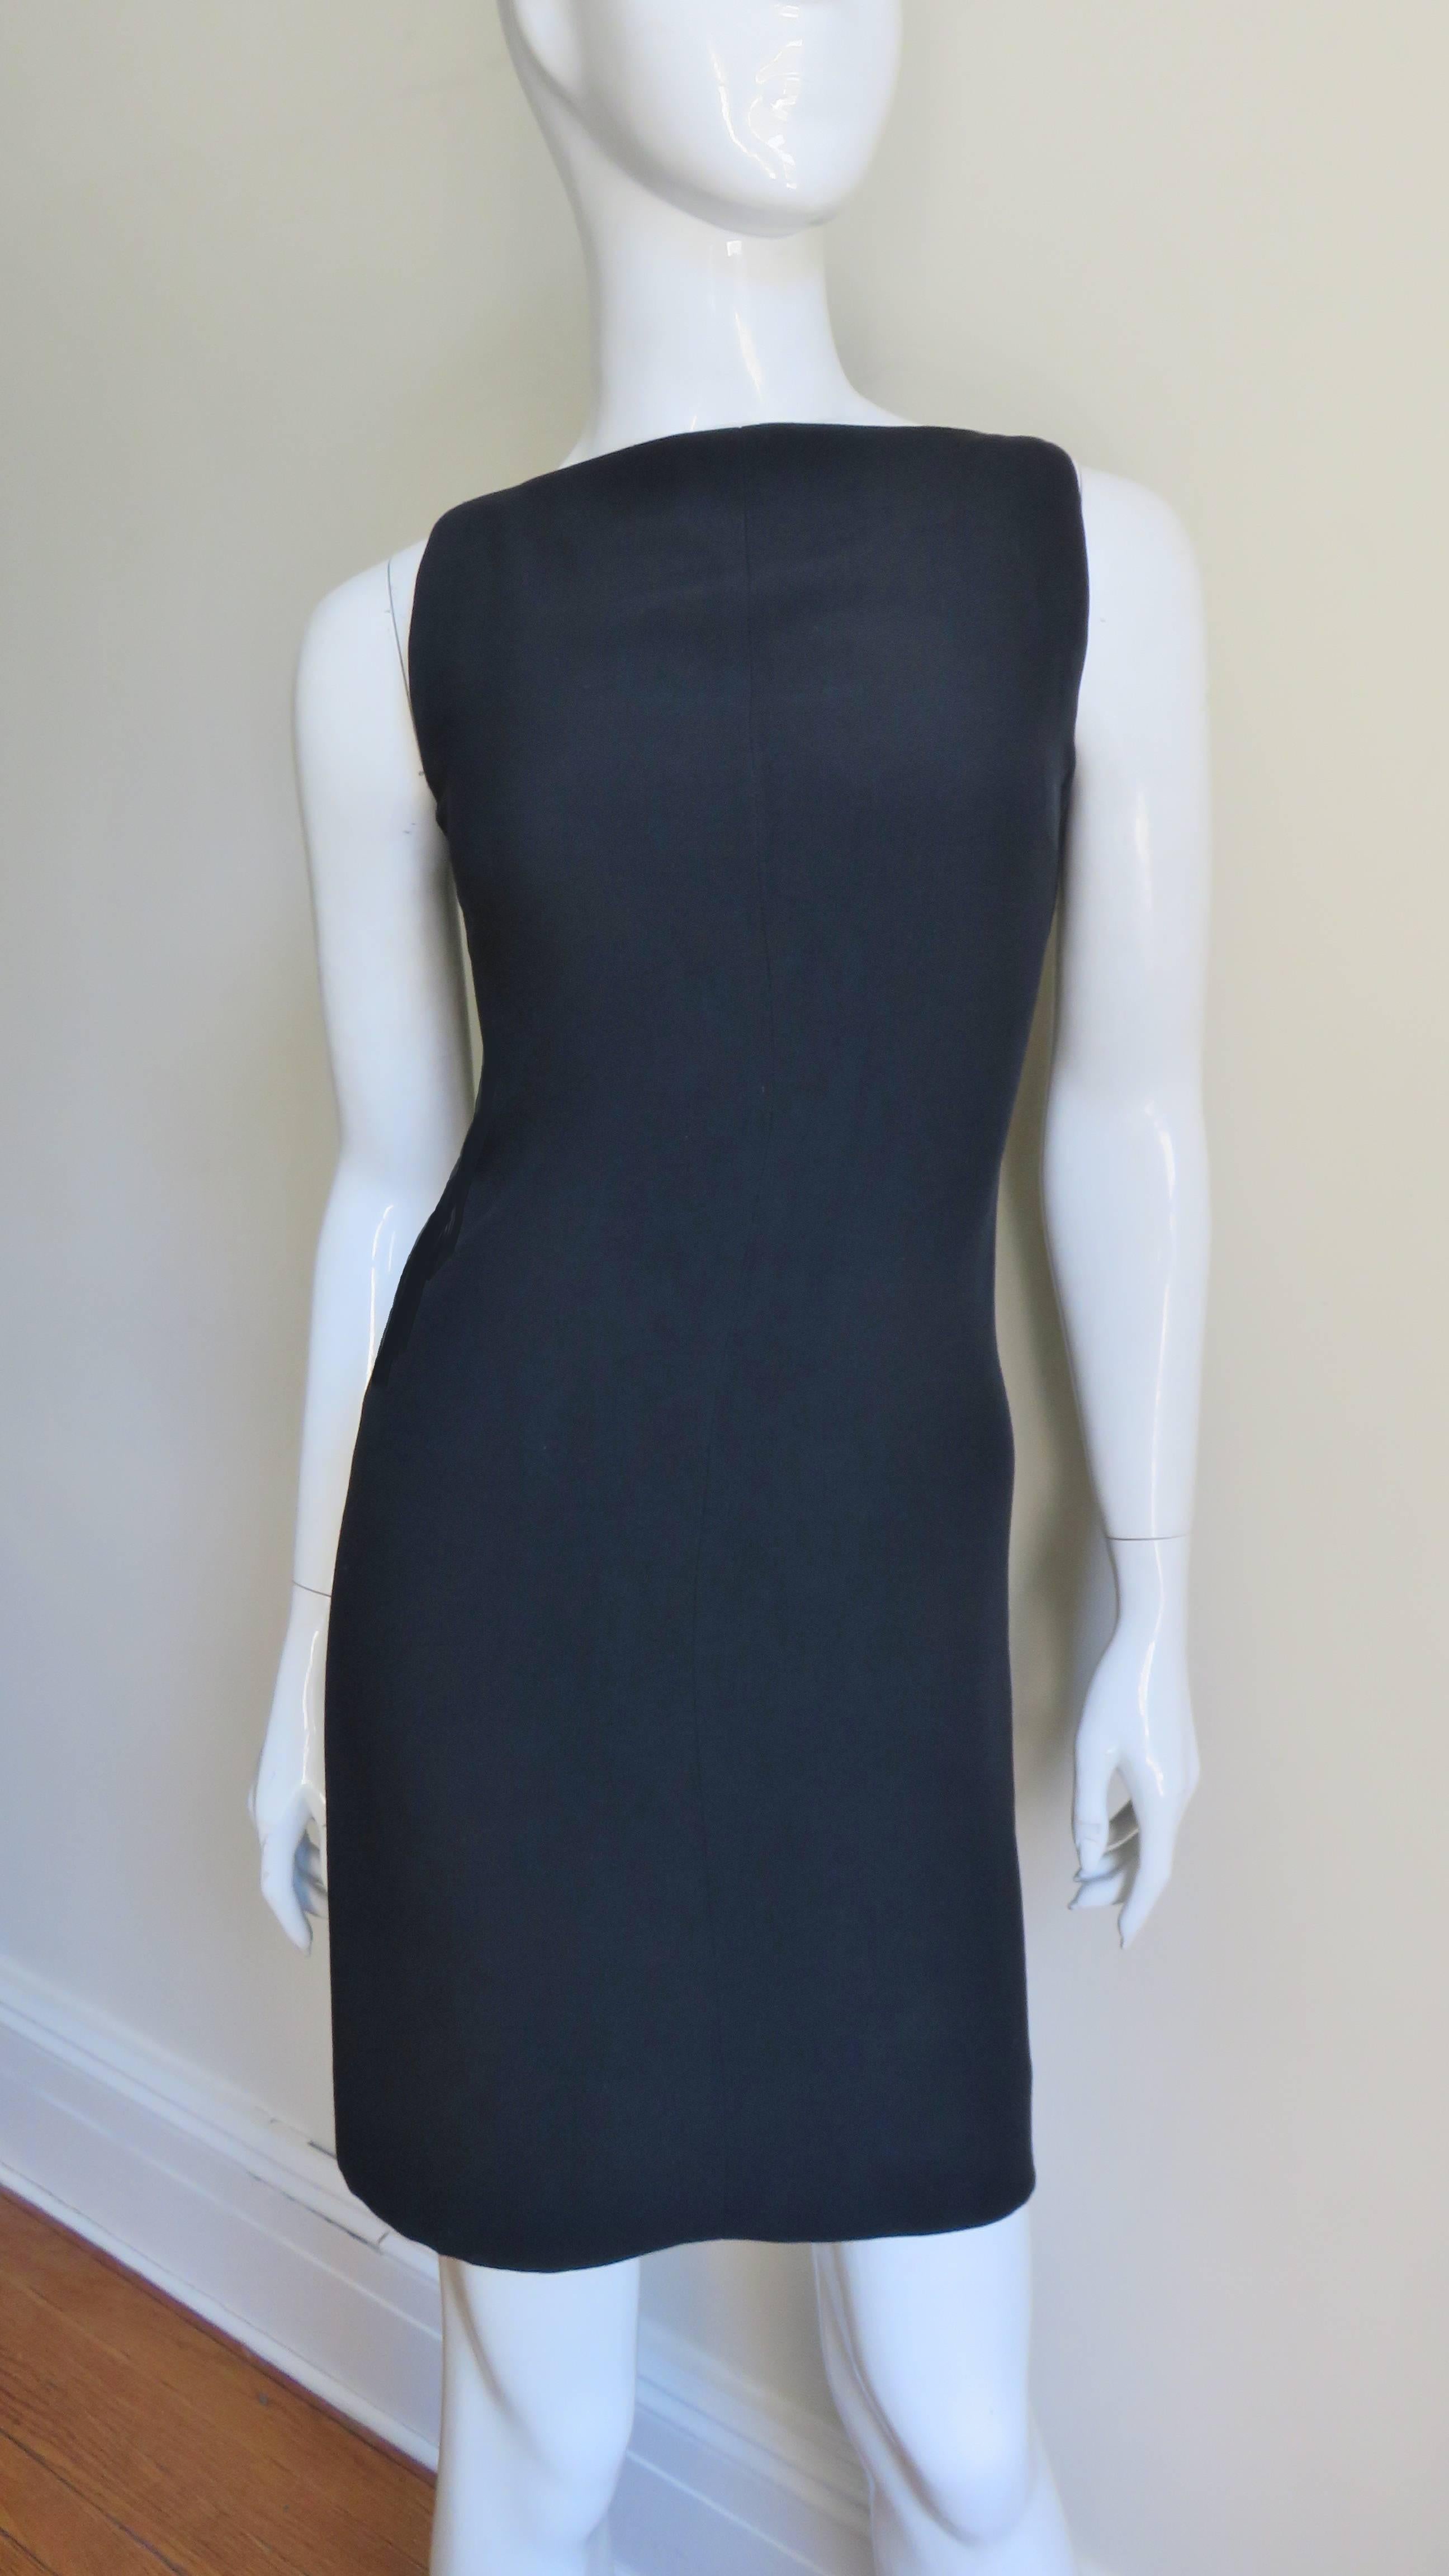 A great little black dress from Herve Leger.  It has a front bateau cut neckline turning into a low cut back.  The dress wraps at the back and closes with hooks, eyes and snaps.  
Fits sizes Extra Small, Small, Medium.

Bust  34